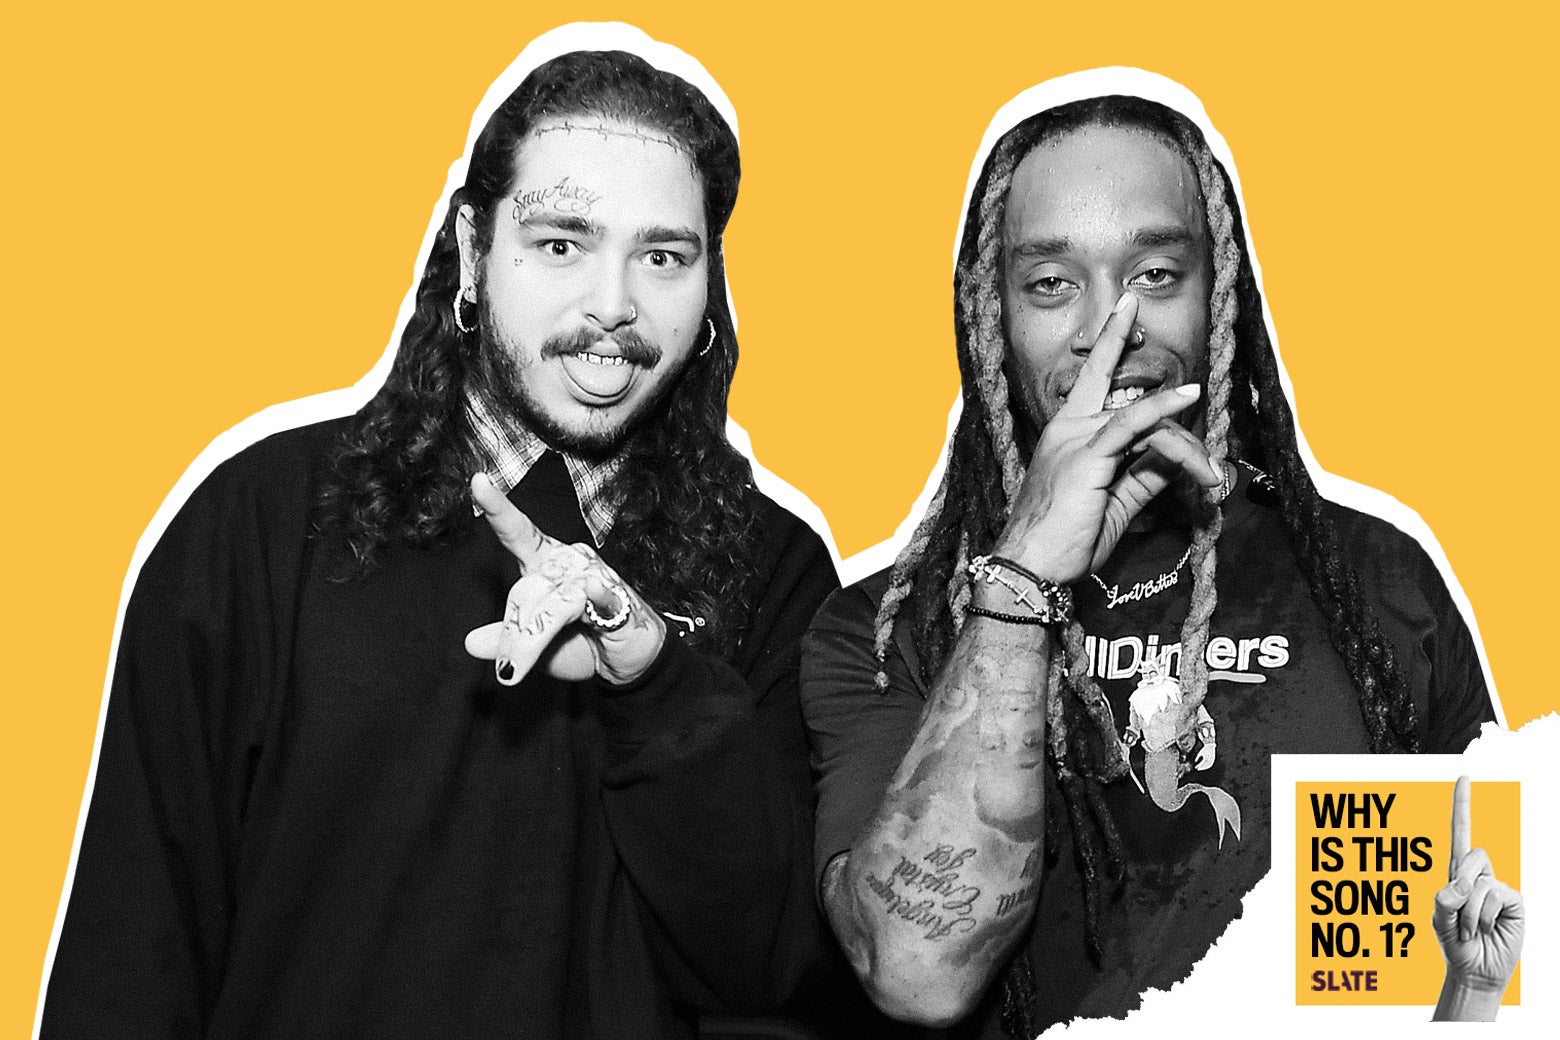 Post Malone and Ty Dolla Sign with the Why Is This Song No. 1? logo.